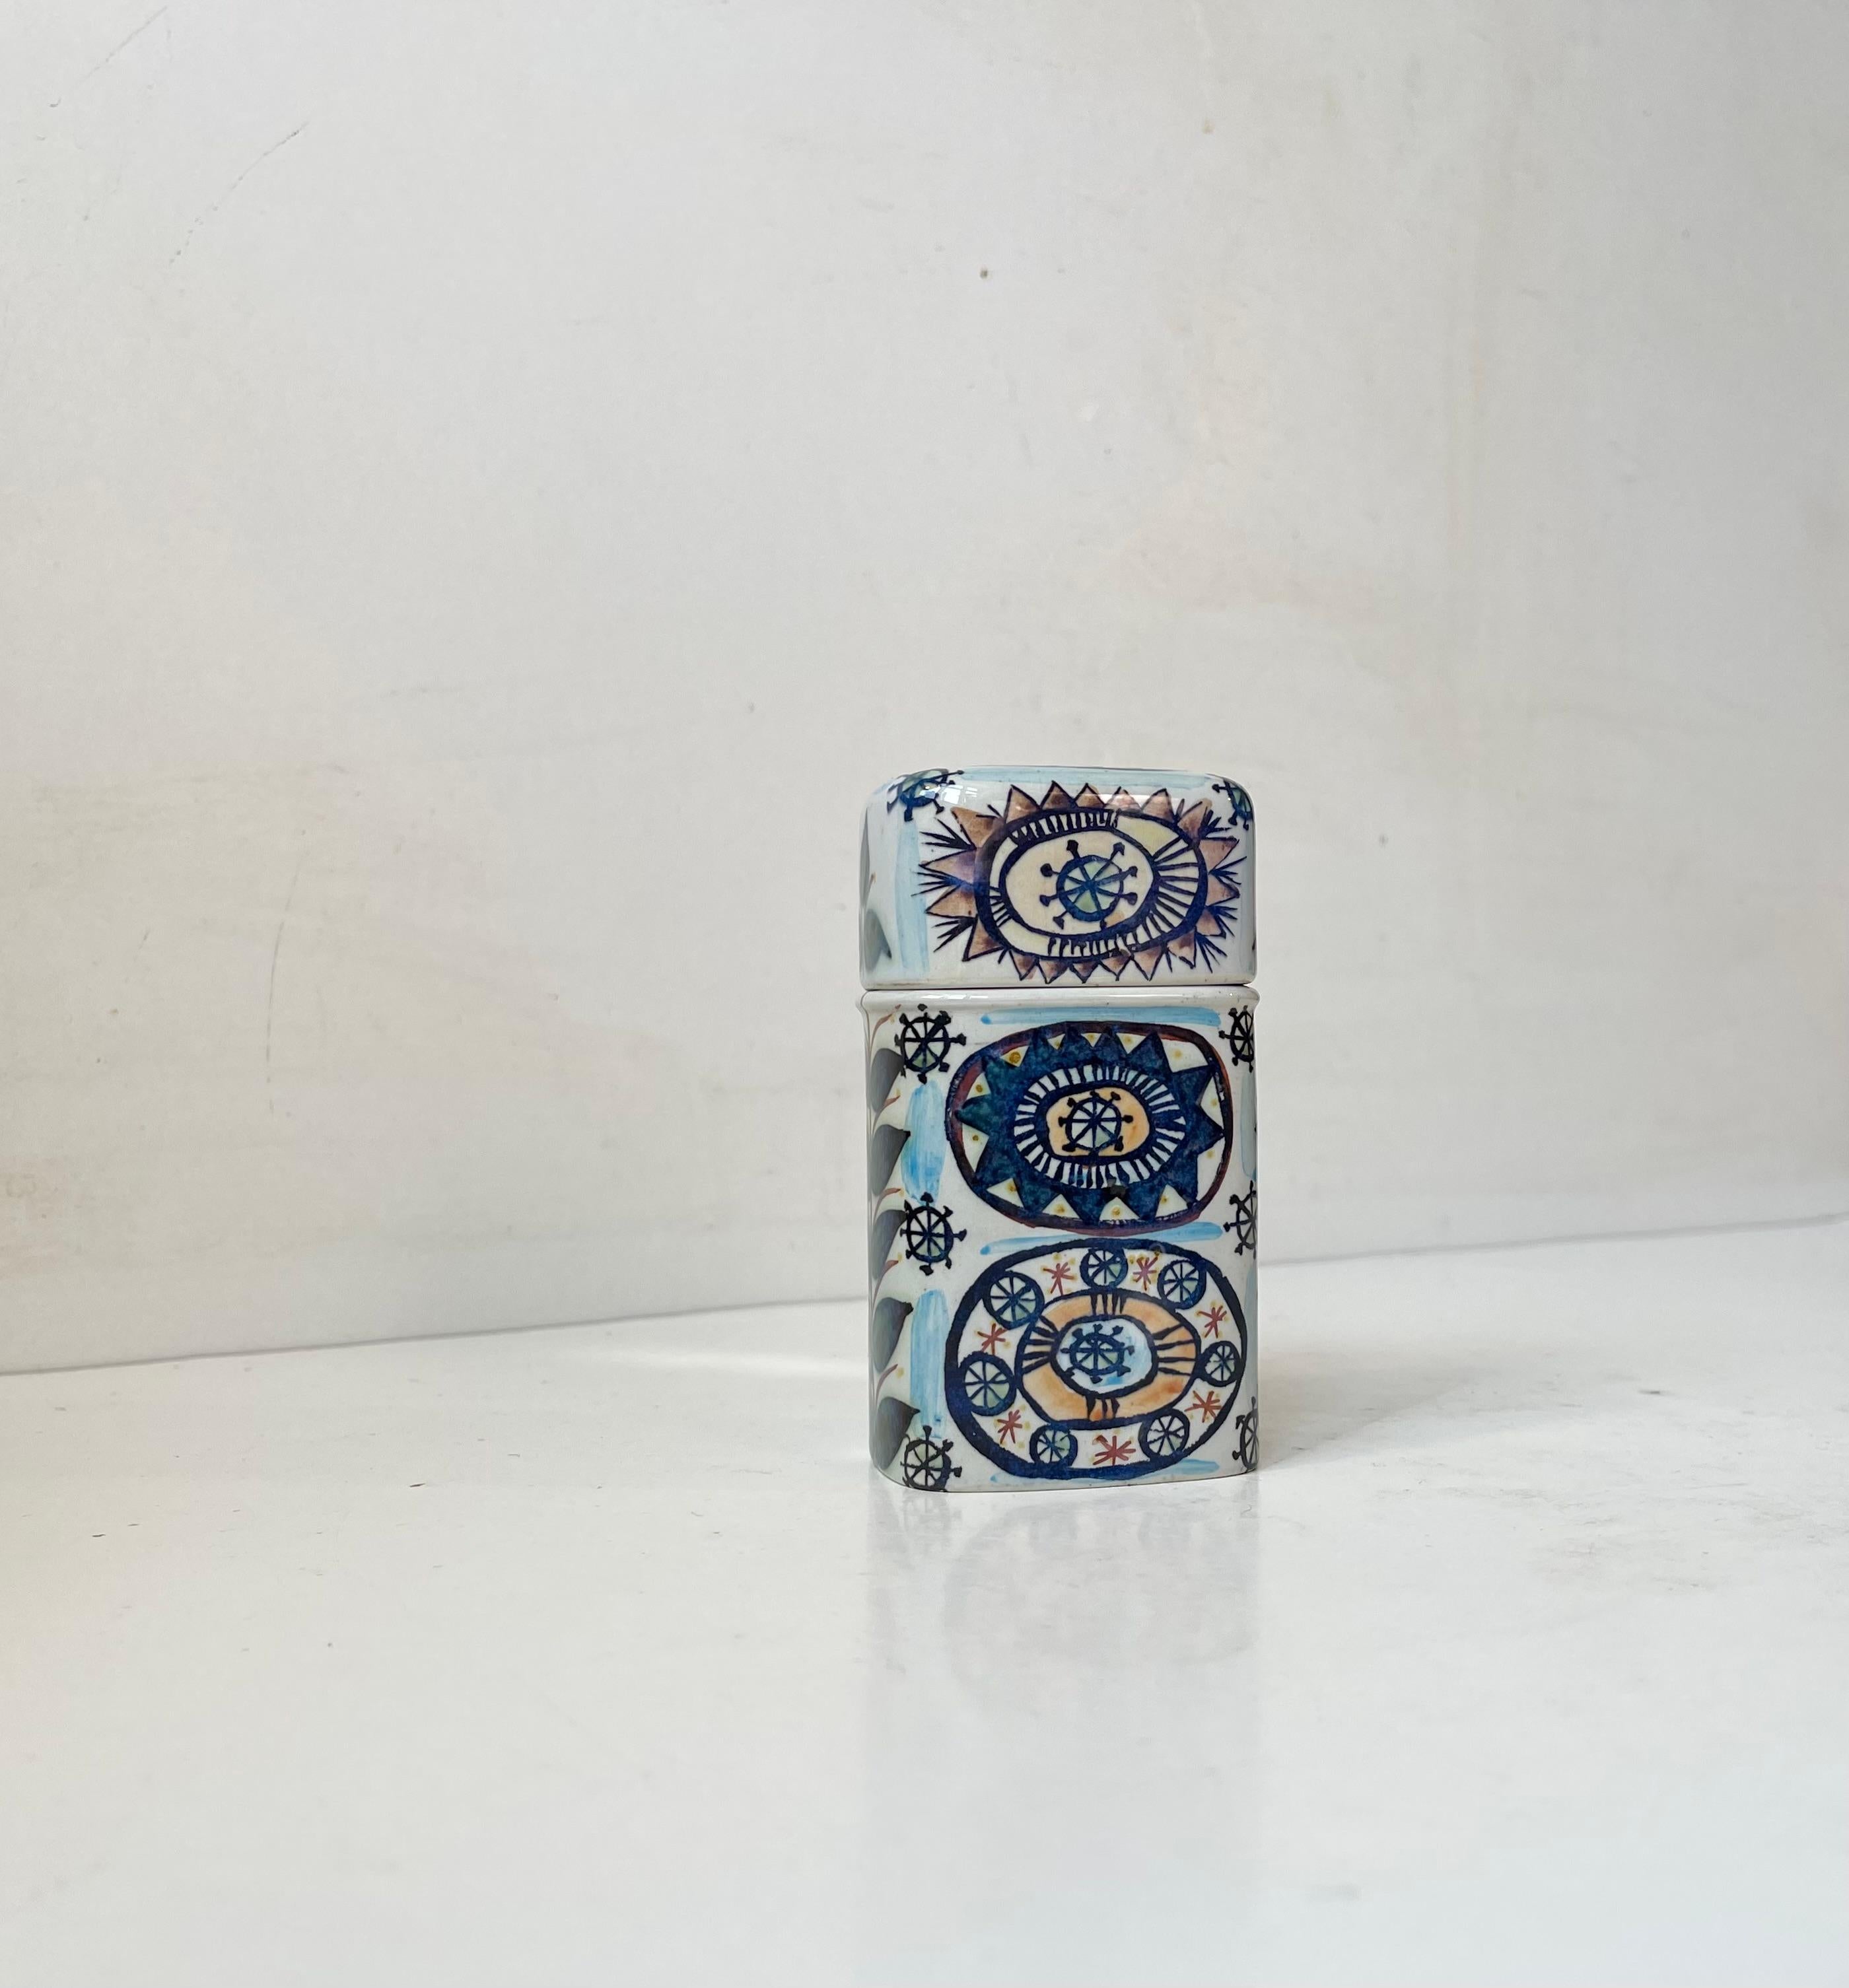 A rare Royal Copenhagen Cigarette Jar/trinket in faience decorated by Norwegian Female artist/designer Marianne Johnson. It is decorated on all sides and features slightly tilted base for easy access to your cigarettes. Designed and manufactured